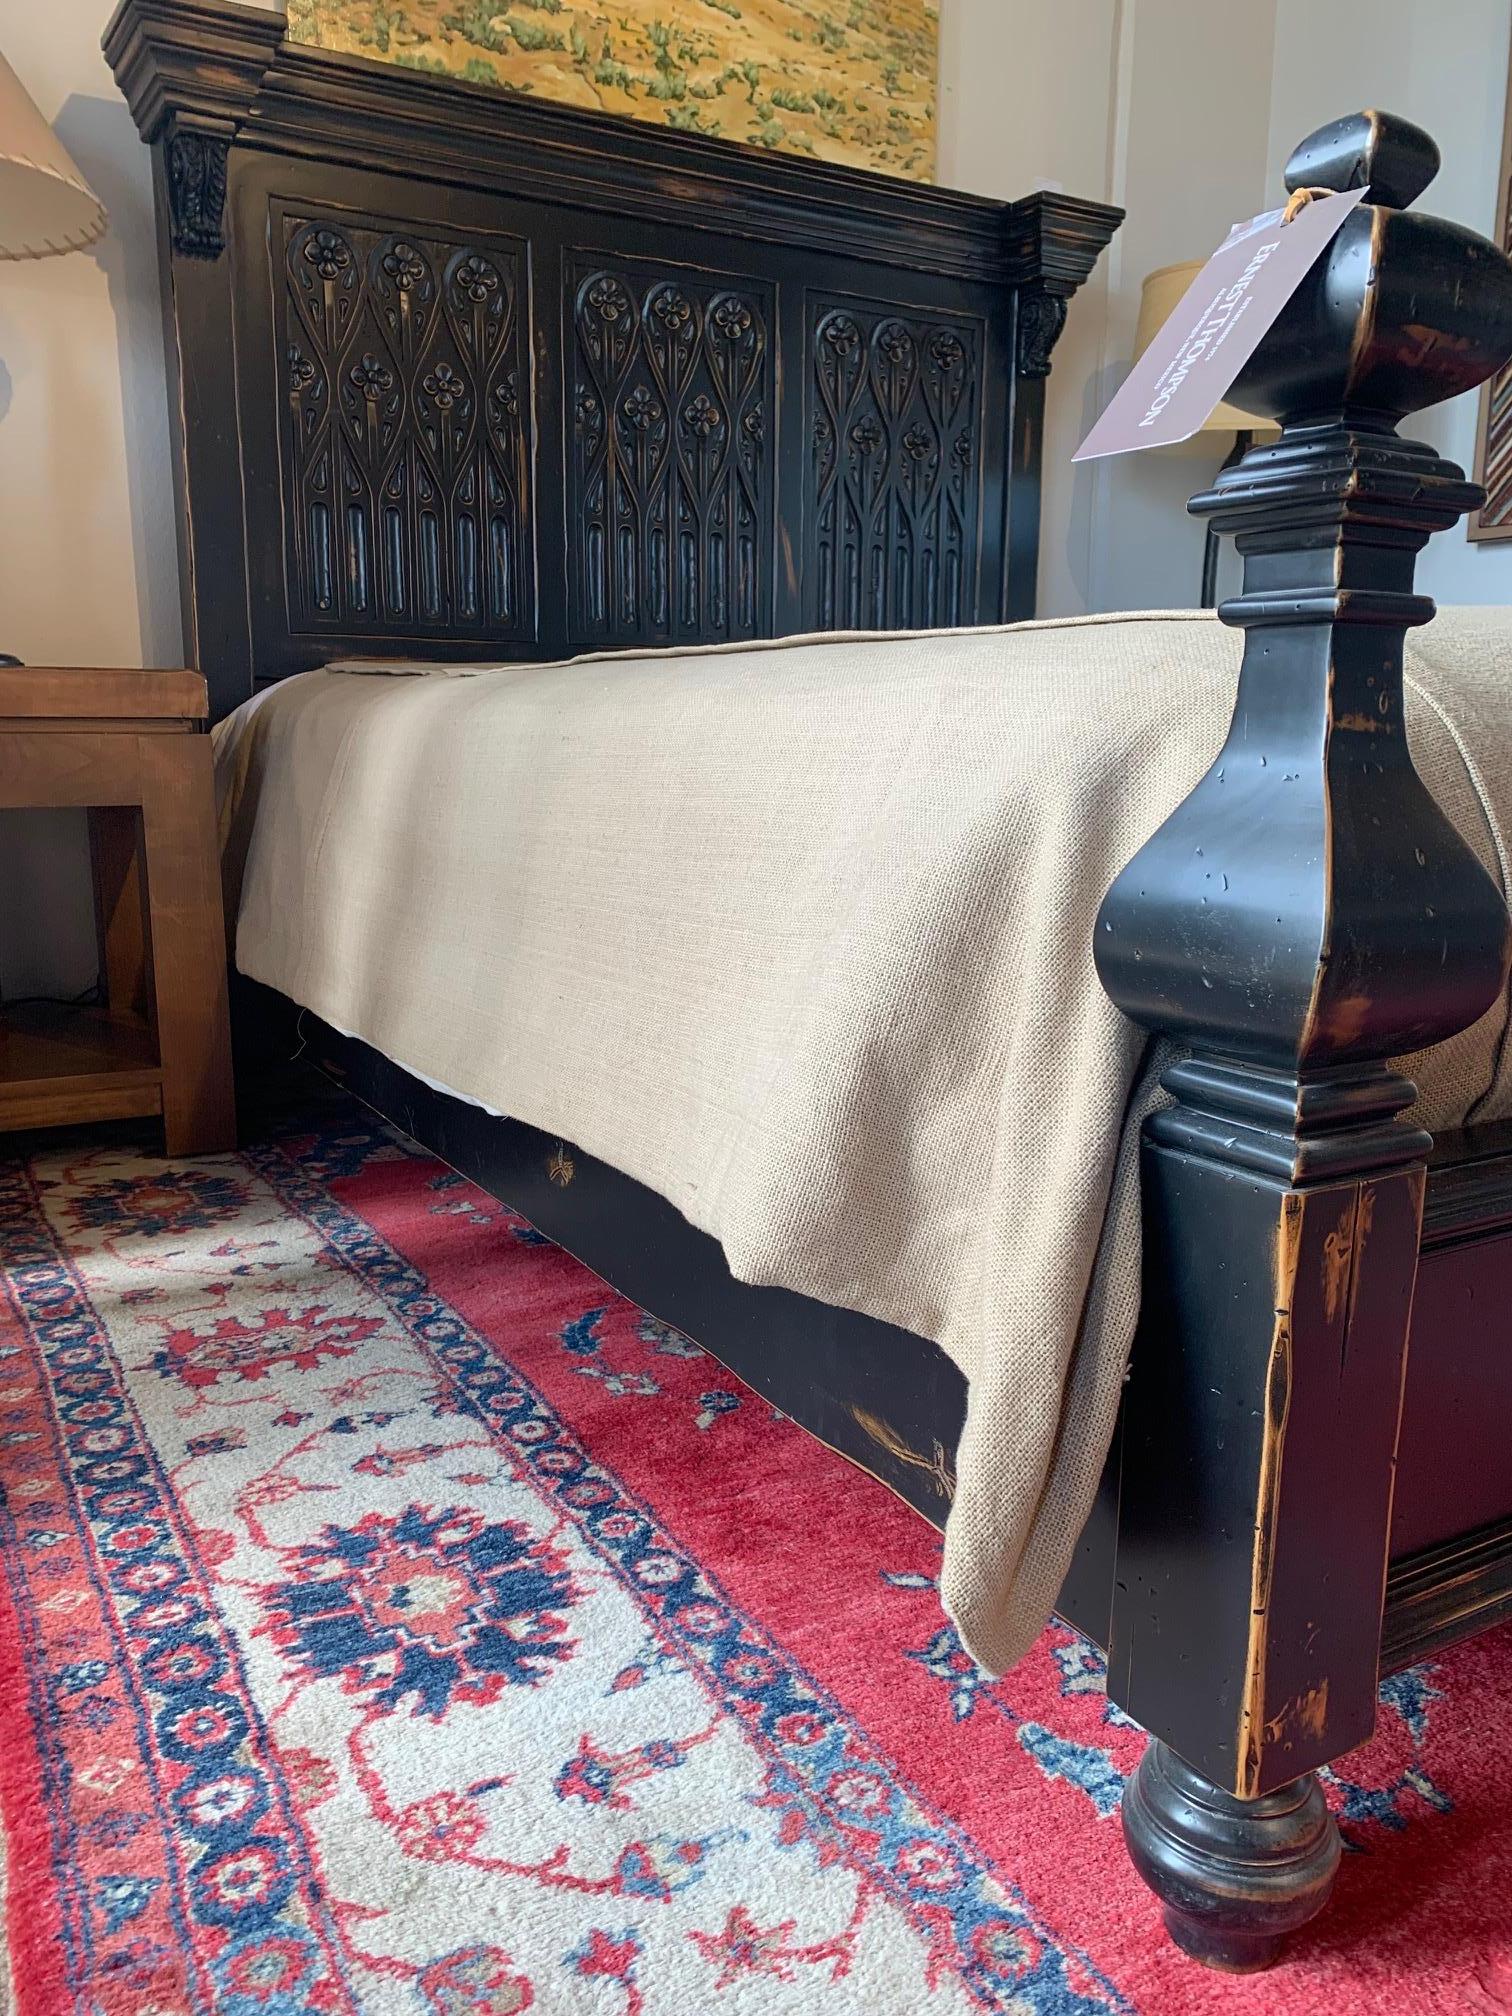 This beautiful Del Mar Queen Bed is made of Knotty Alder with a black scraped finish. Hand carved.

This is a showroom model that has very little wear.